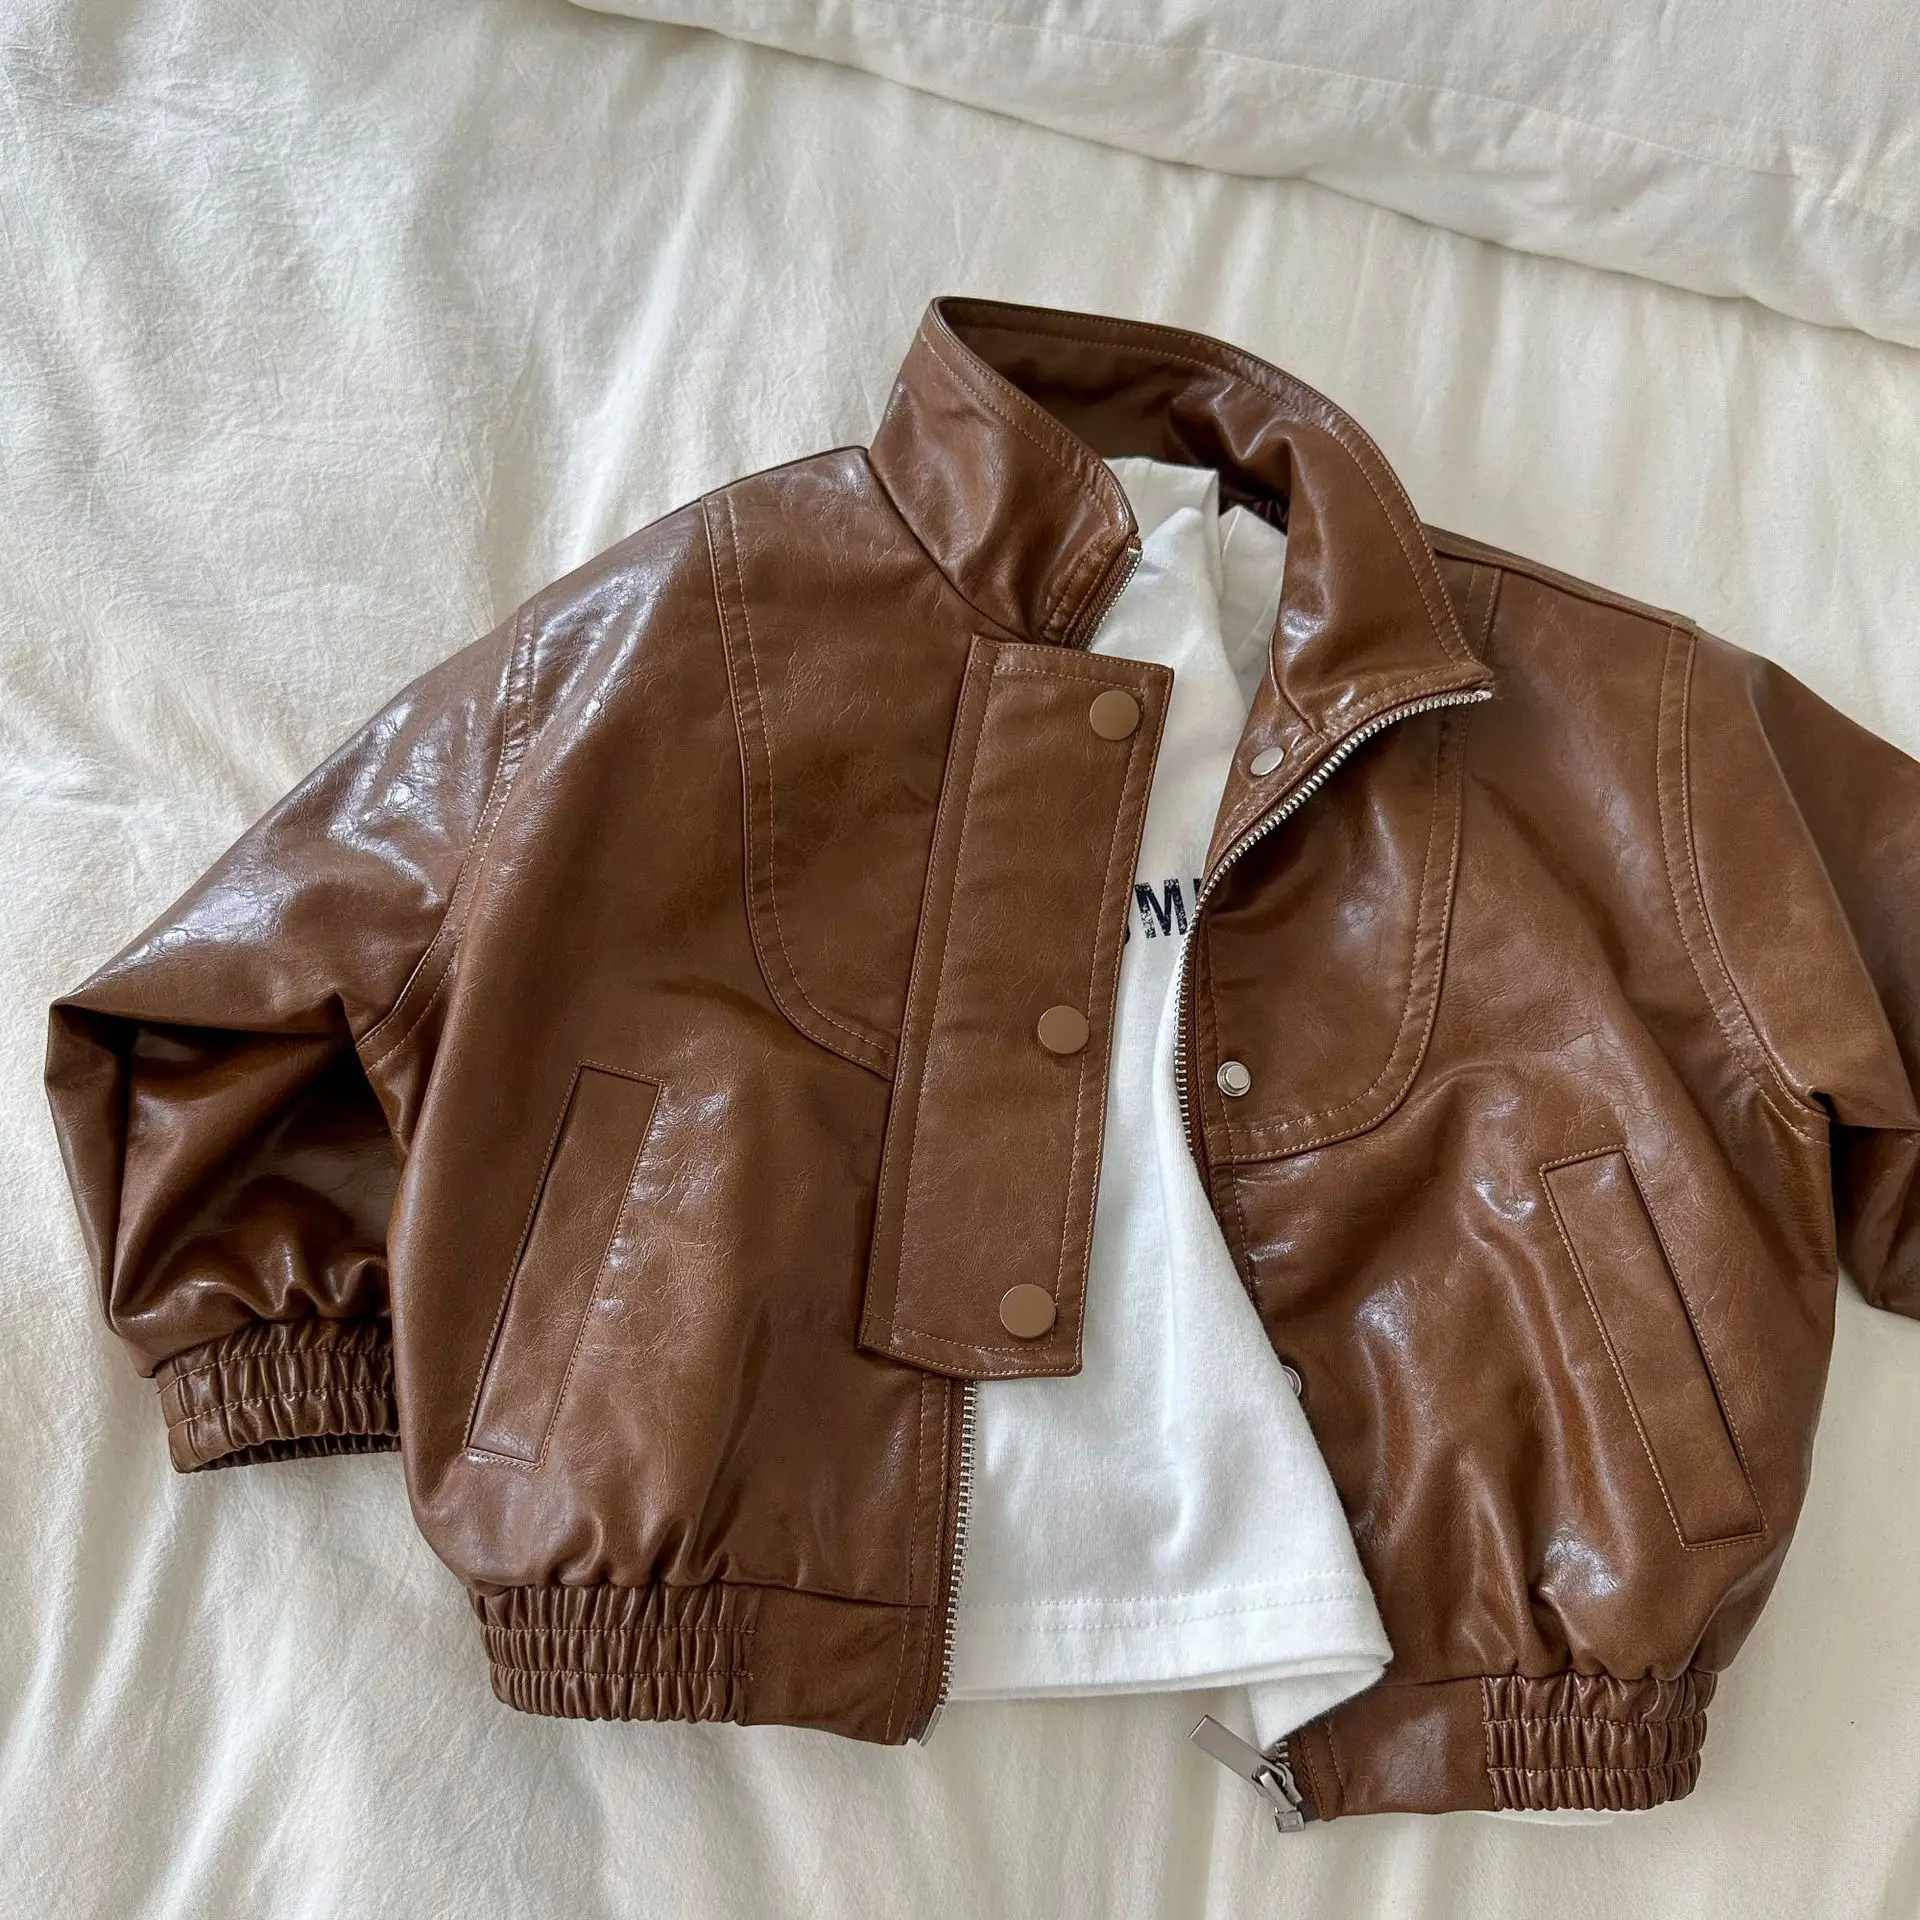 2023 autumn winter new children's casual solid brown leather coat boys girls unisex fashion jacket